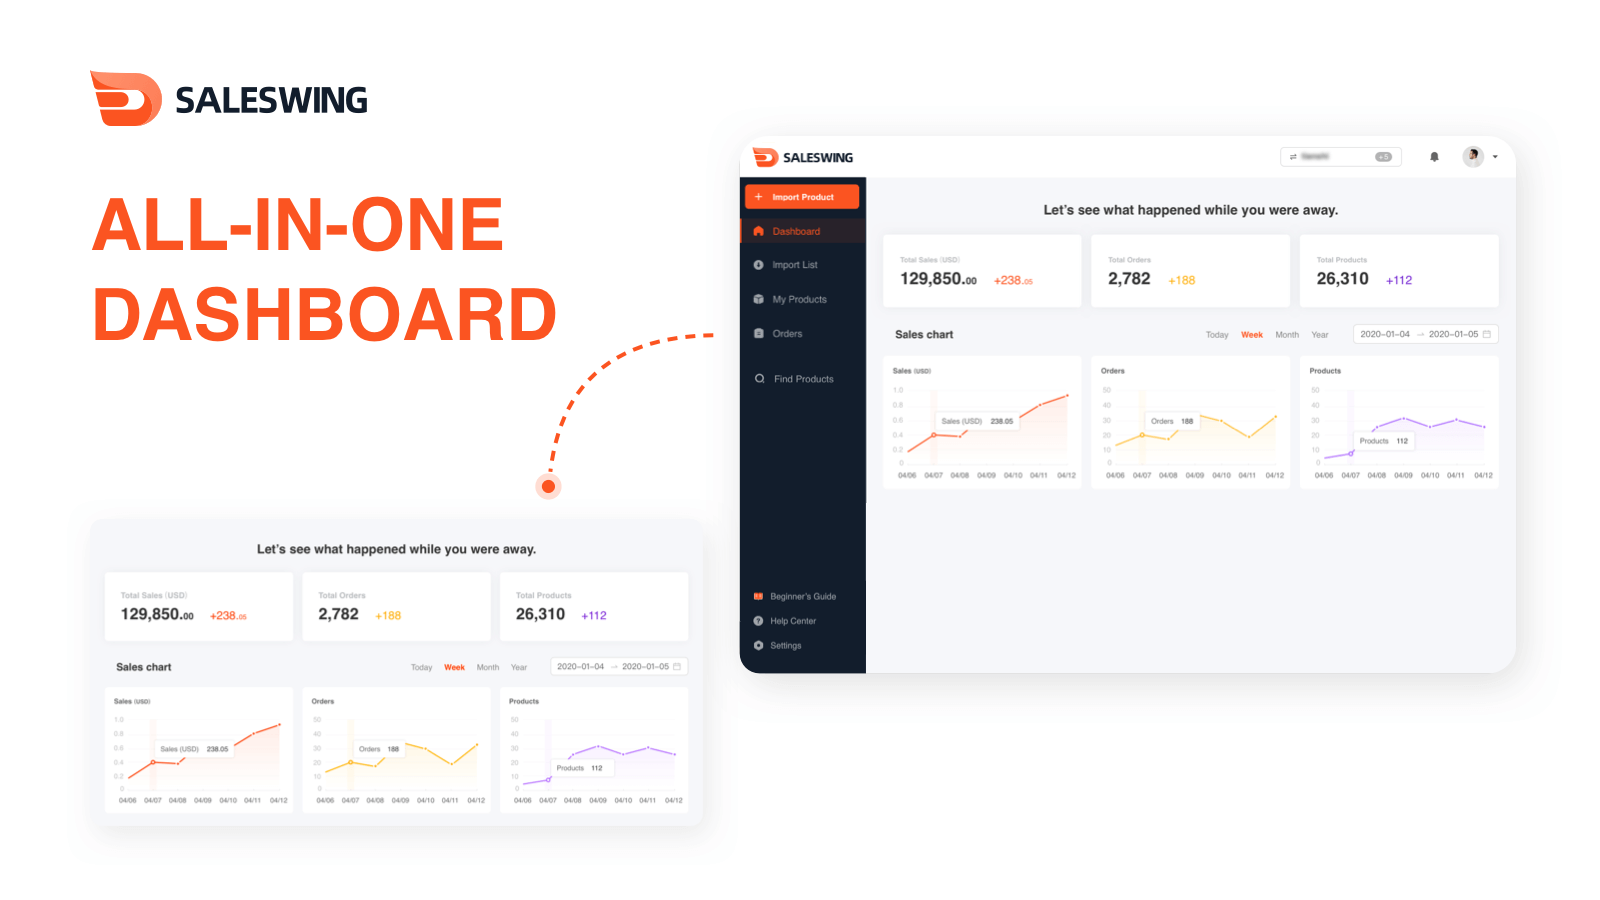 ALL-IN-ONE DASHBOARD